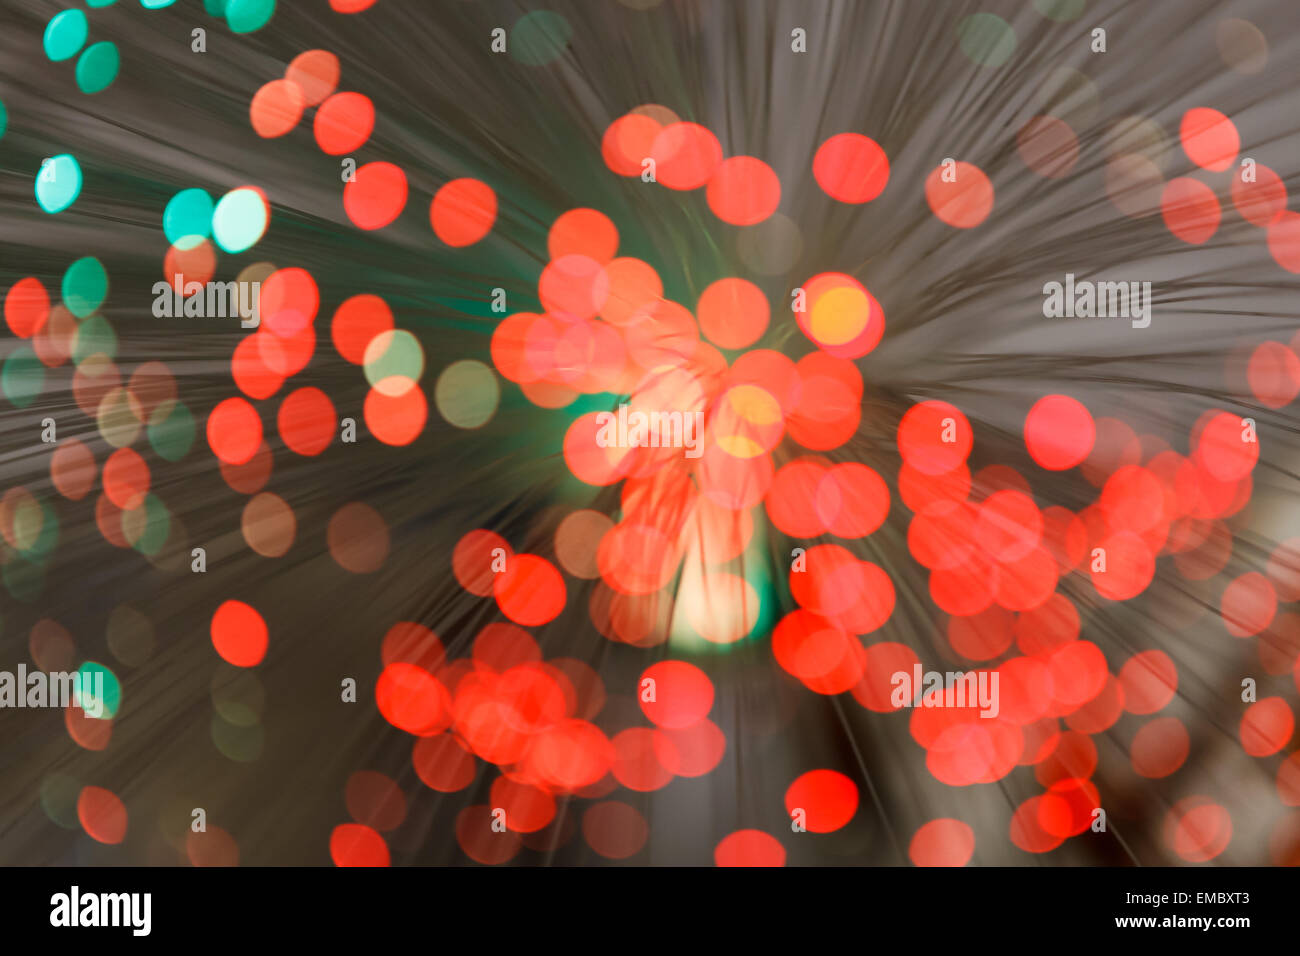 Illuminated background, abstract red lights Stock Photo